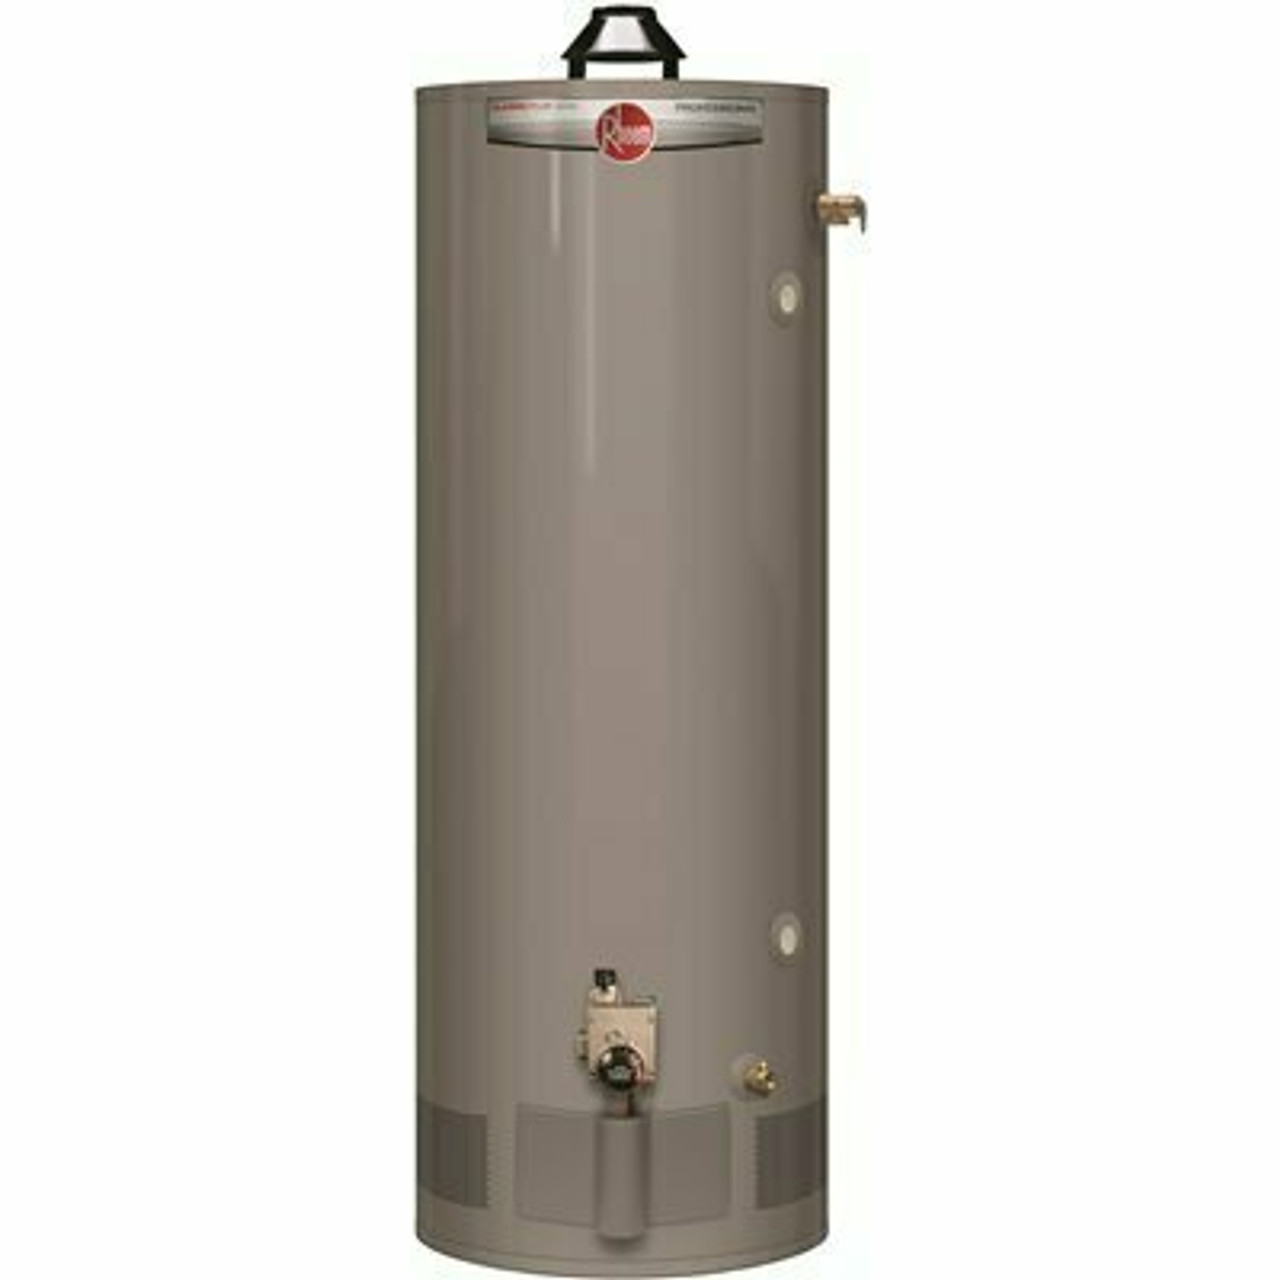 Rheem Pro-Classic Plus 40 Gal. Tall 8-Year Warranty Residential Natural Gas Water Heater